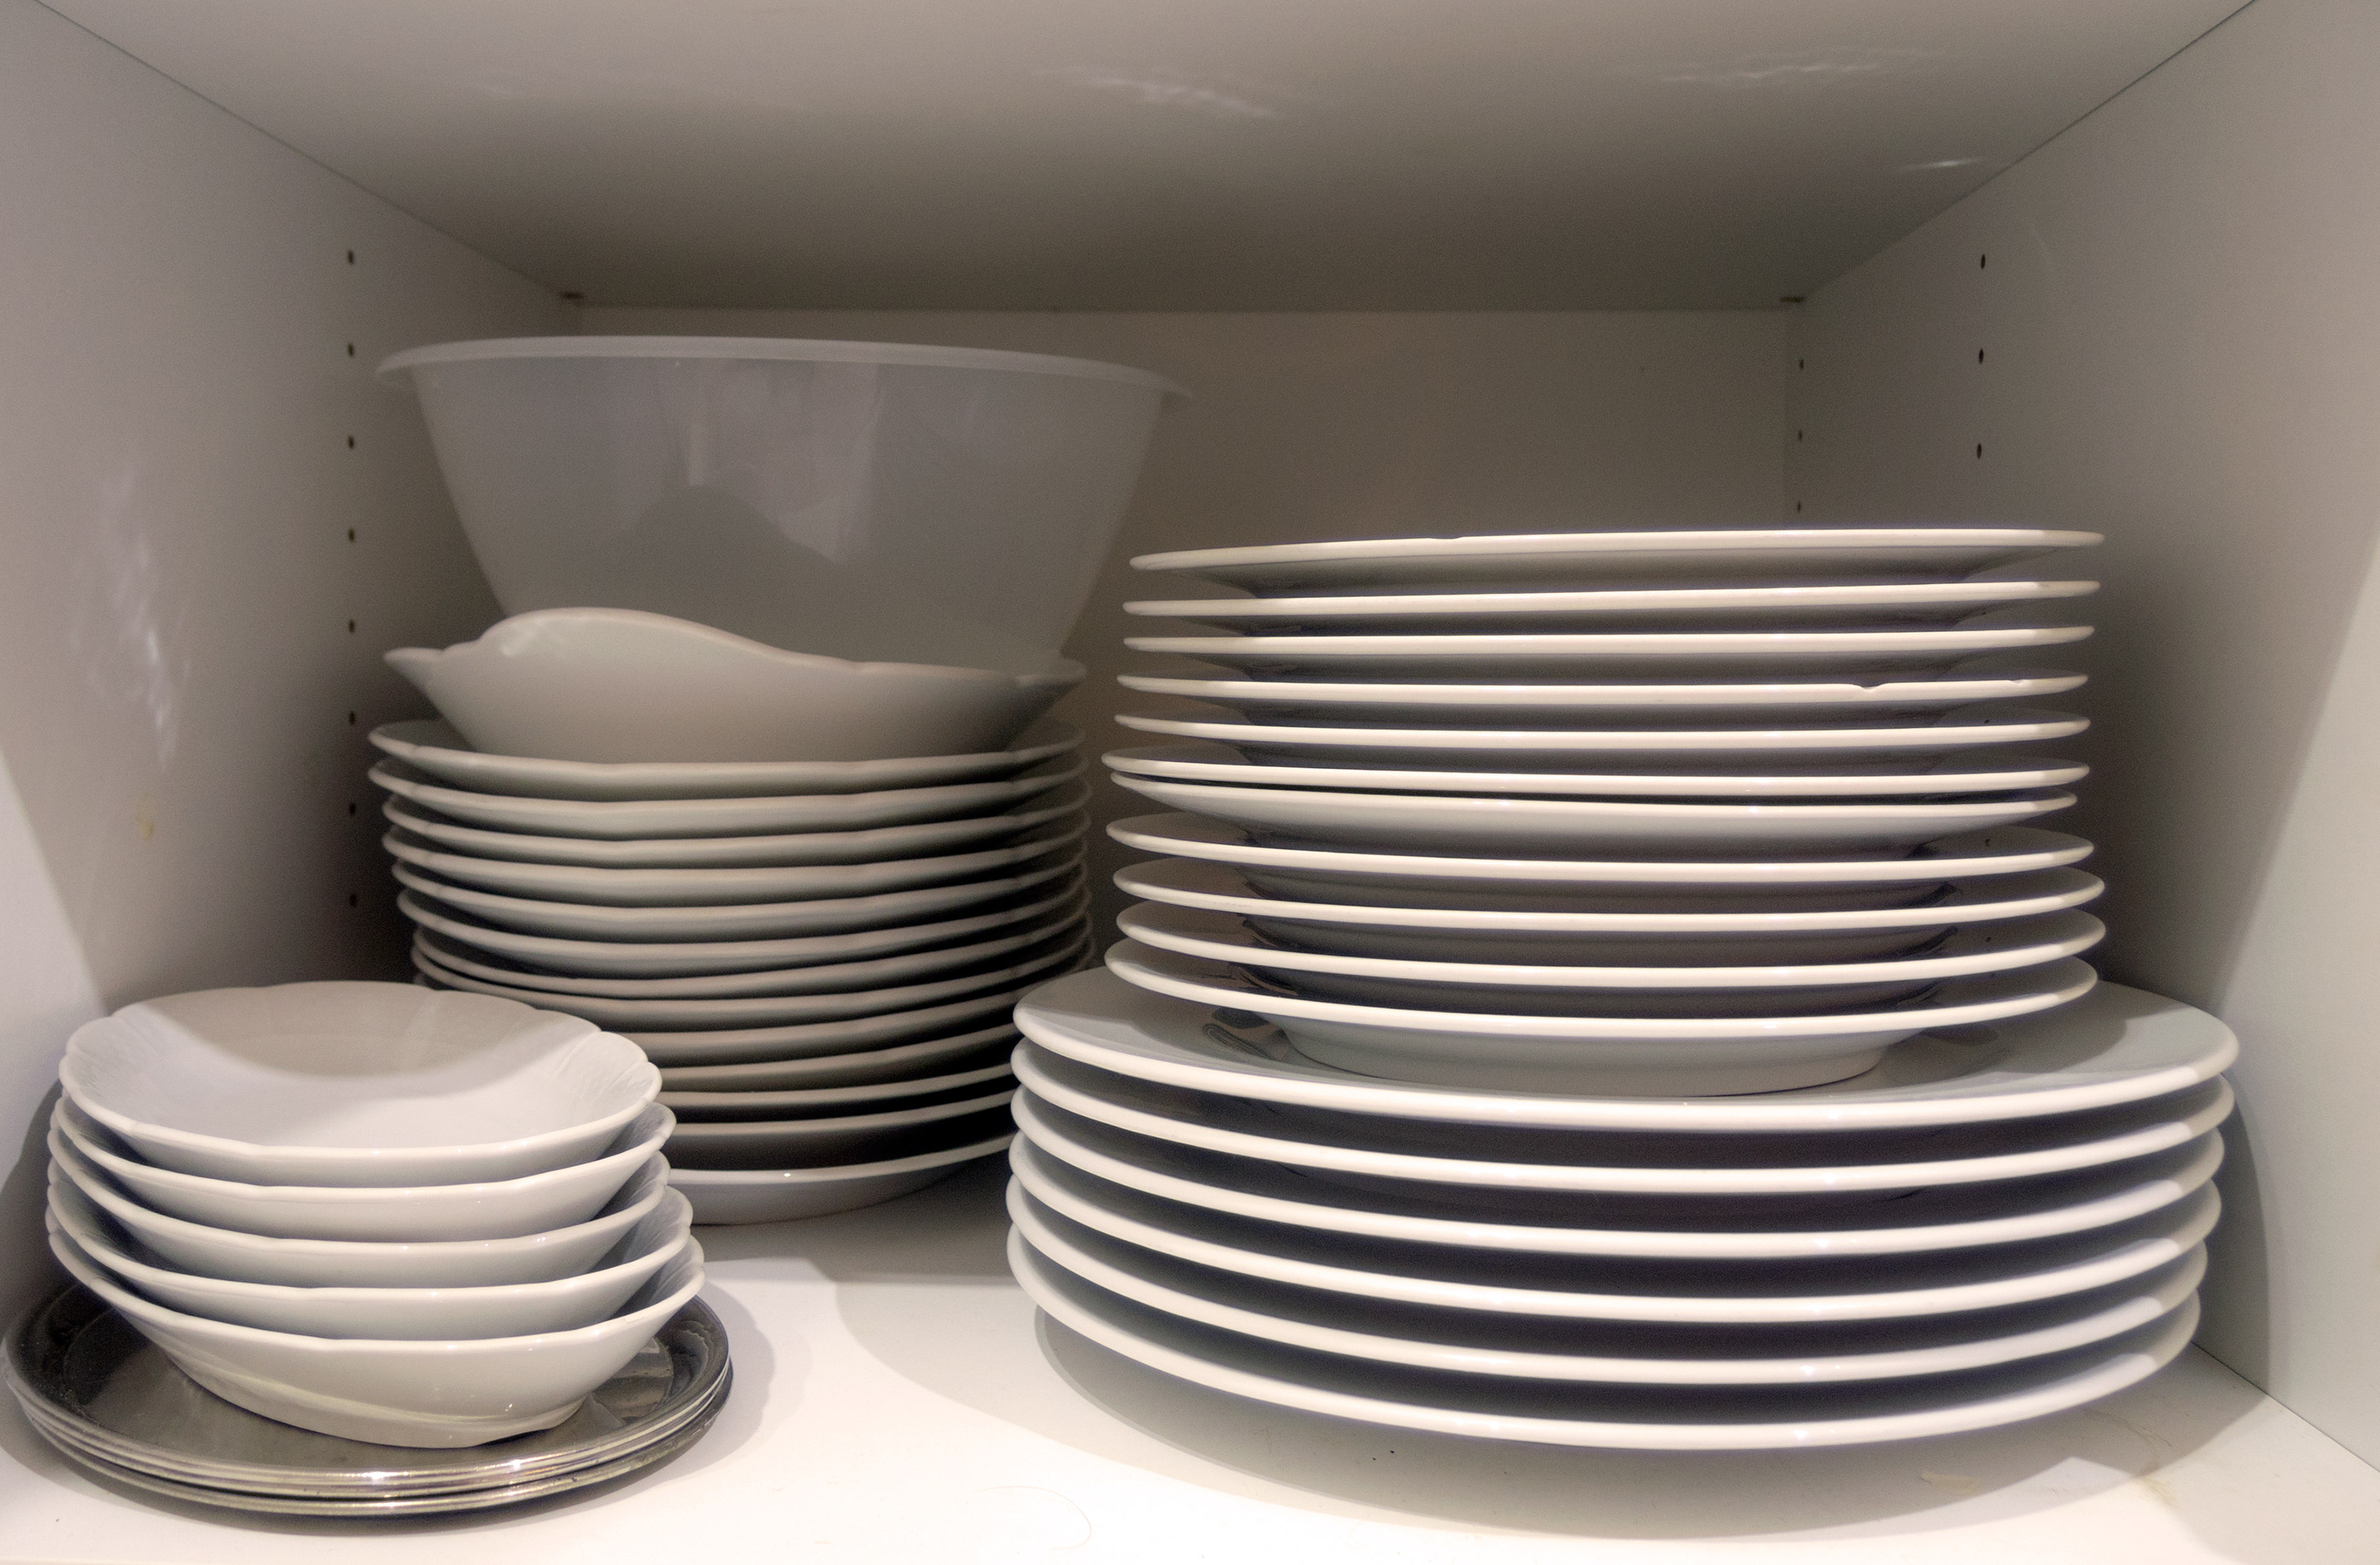 Dishes in cupboard in the kitchen | Free Stock Photo | LibreShot